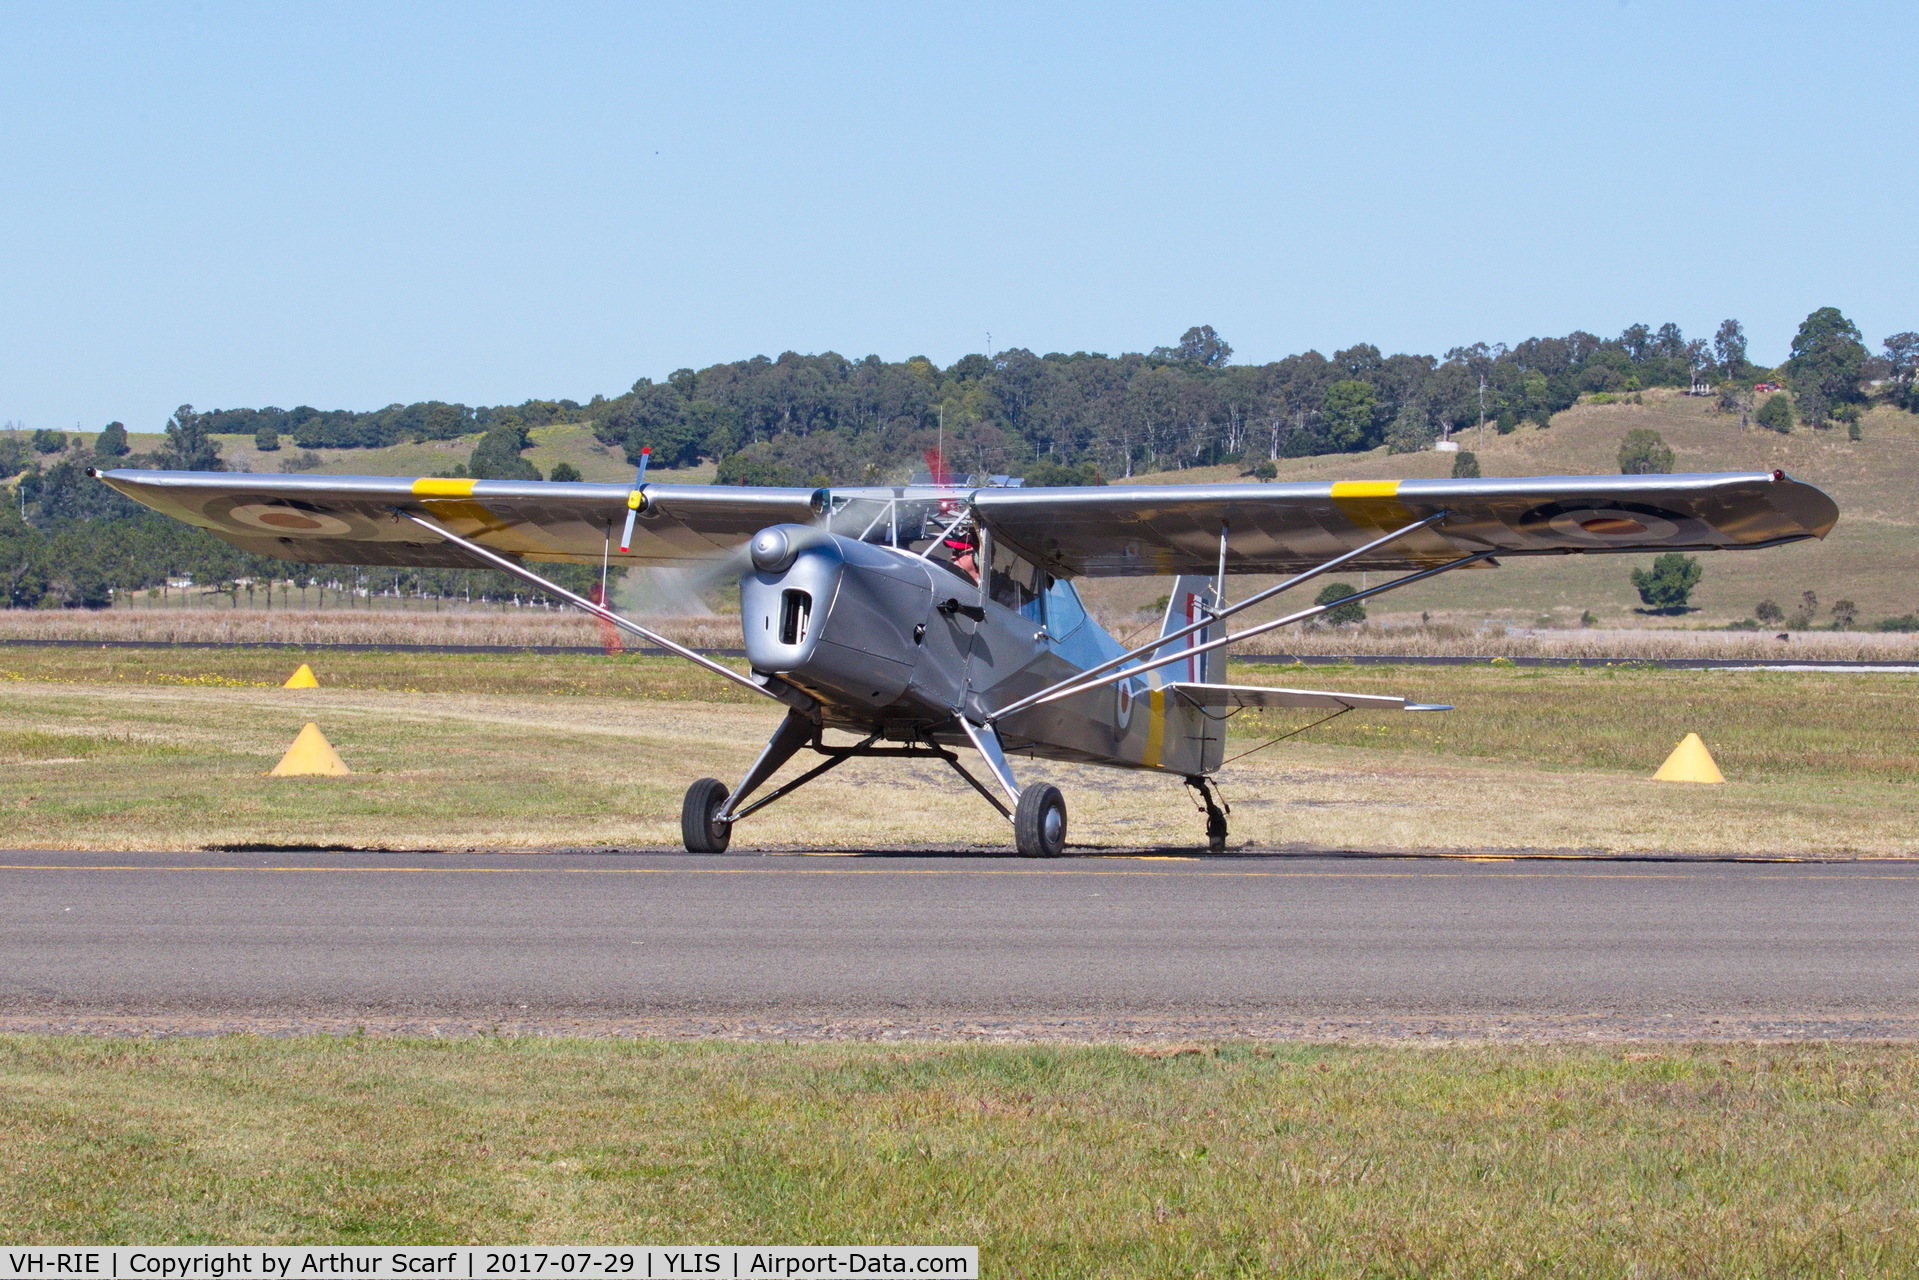 VH-RIE, 1954 Auster J-8L Aiglet Trainer C/N 3151, Lismore NSW Aviation Expo 2017